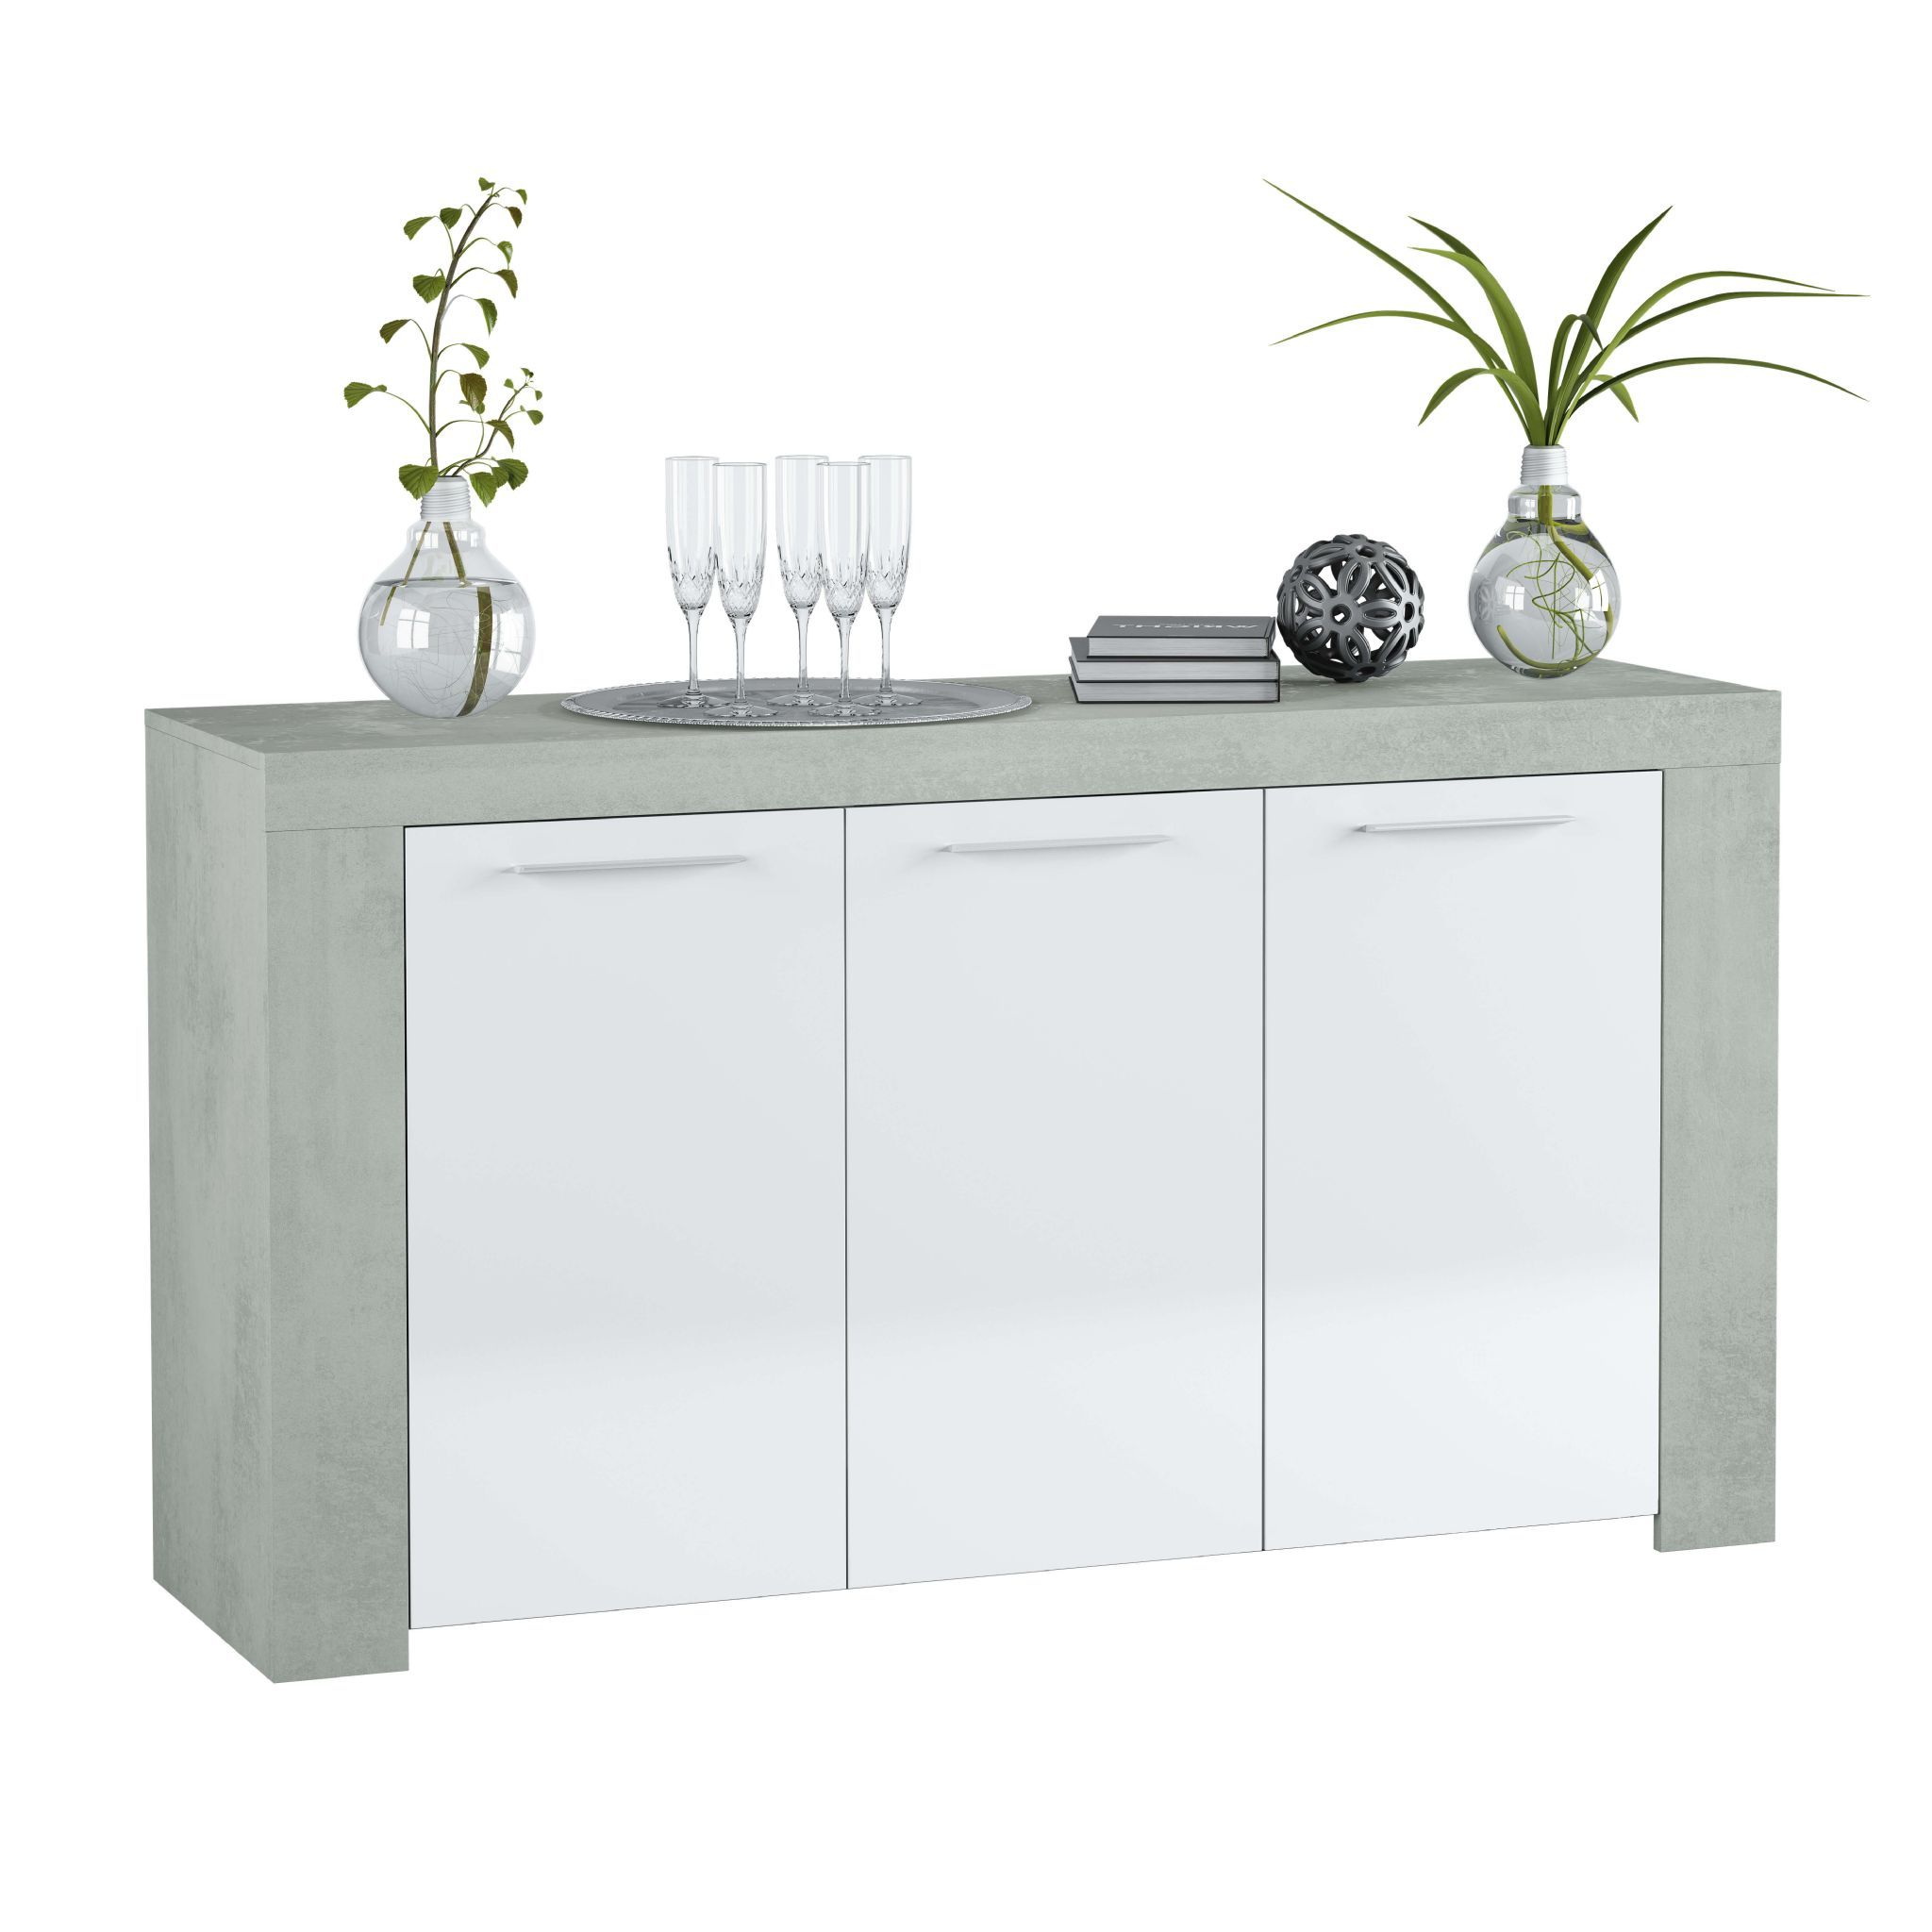 Cubo Grey And White Sideboard – Sale At Furniturefactor With Regard To White And Grey Sideboards (View 17 of 20)